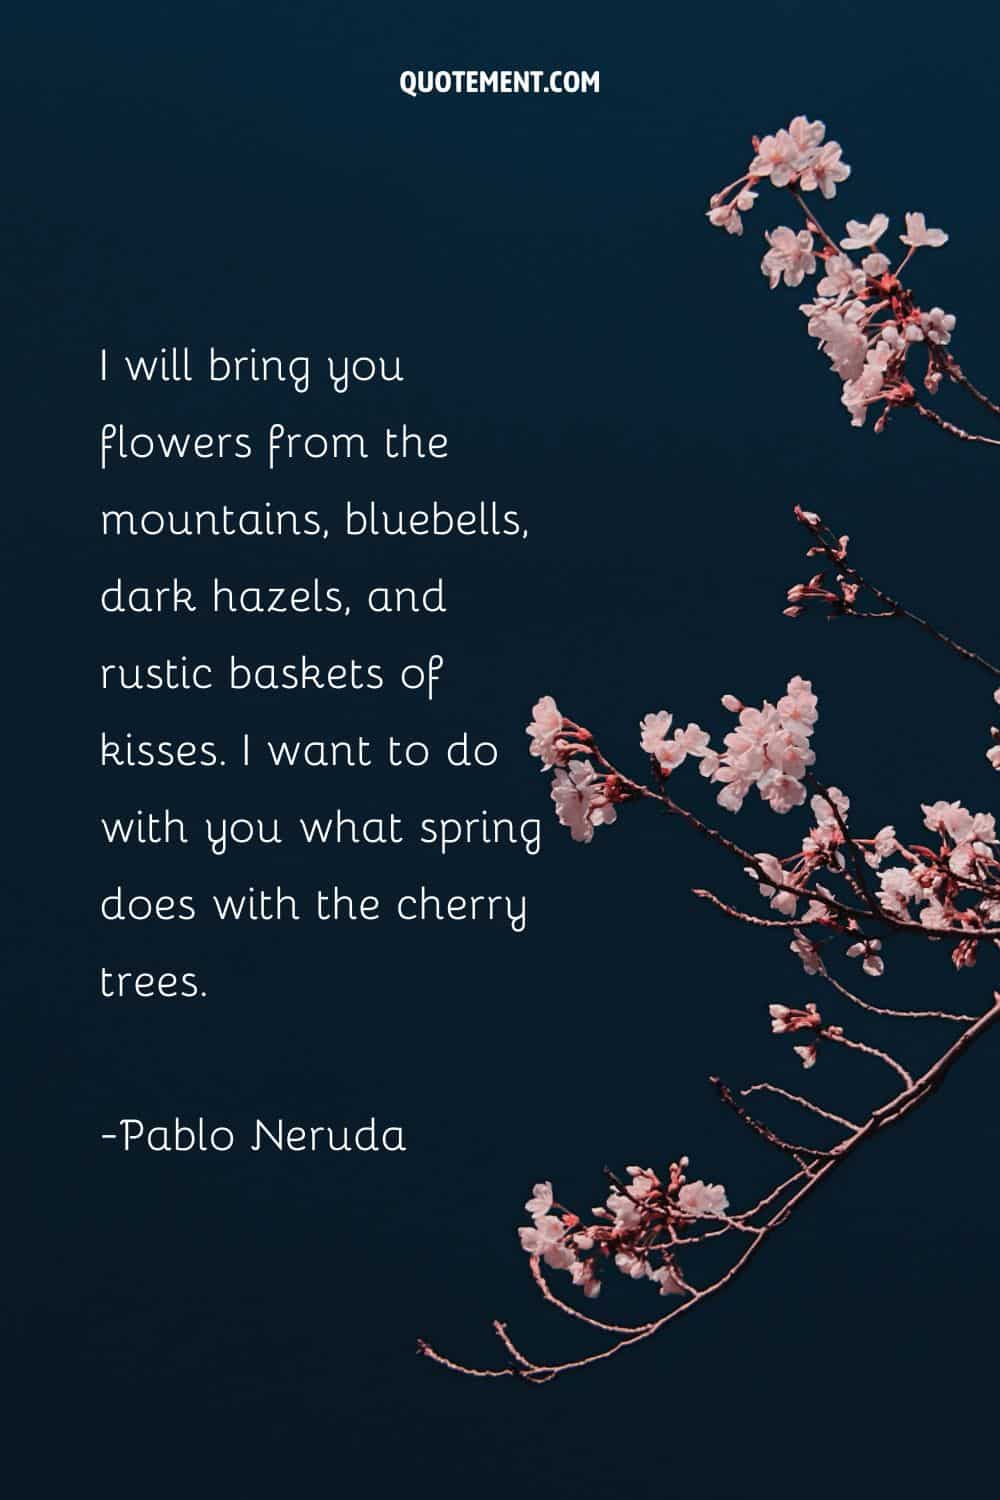 I will bring you flowers from the mountains, bluebells, dark hazels, and rustic baskets of kisses